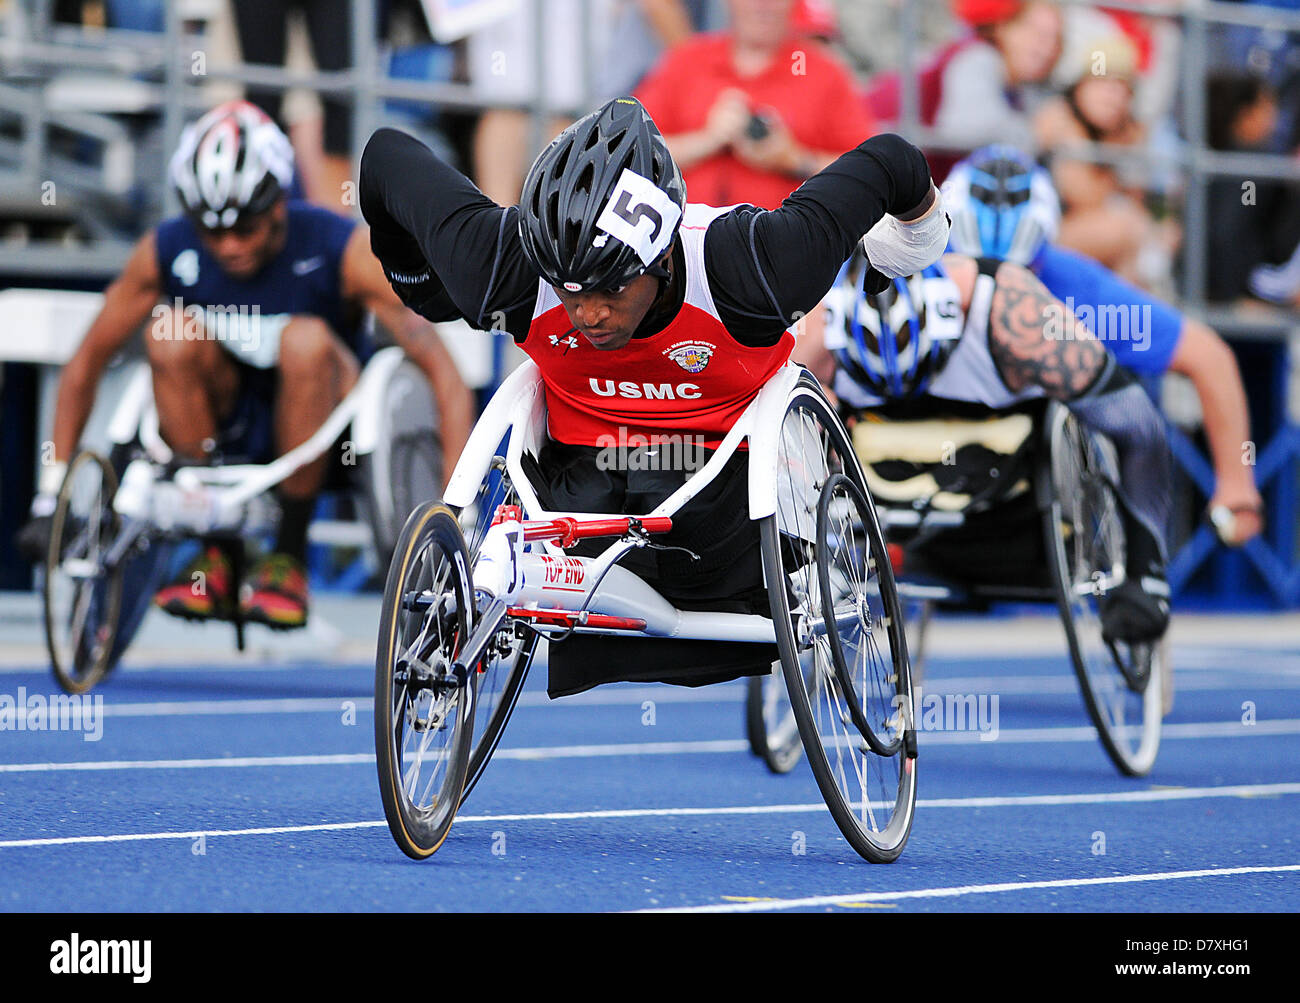 May 14, 2013: Marine Corps wounded warrior, Anthony MDaniel (5), in men's wheelchair action during Warrior Games track & field events at the United States Air Force Academy, Colorado Springs, Colorado. Over 260 injured and disabled service men and women have gathered in Colorado Springs to compete in seven sports, May 11-16. All branches of the military are represented, including Special Operations and members of the British Armed Forces. Stock Photo